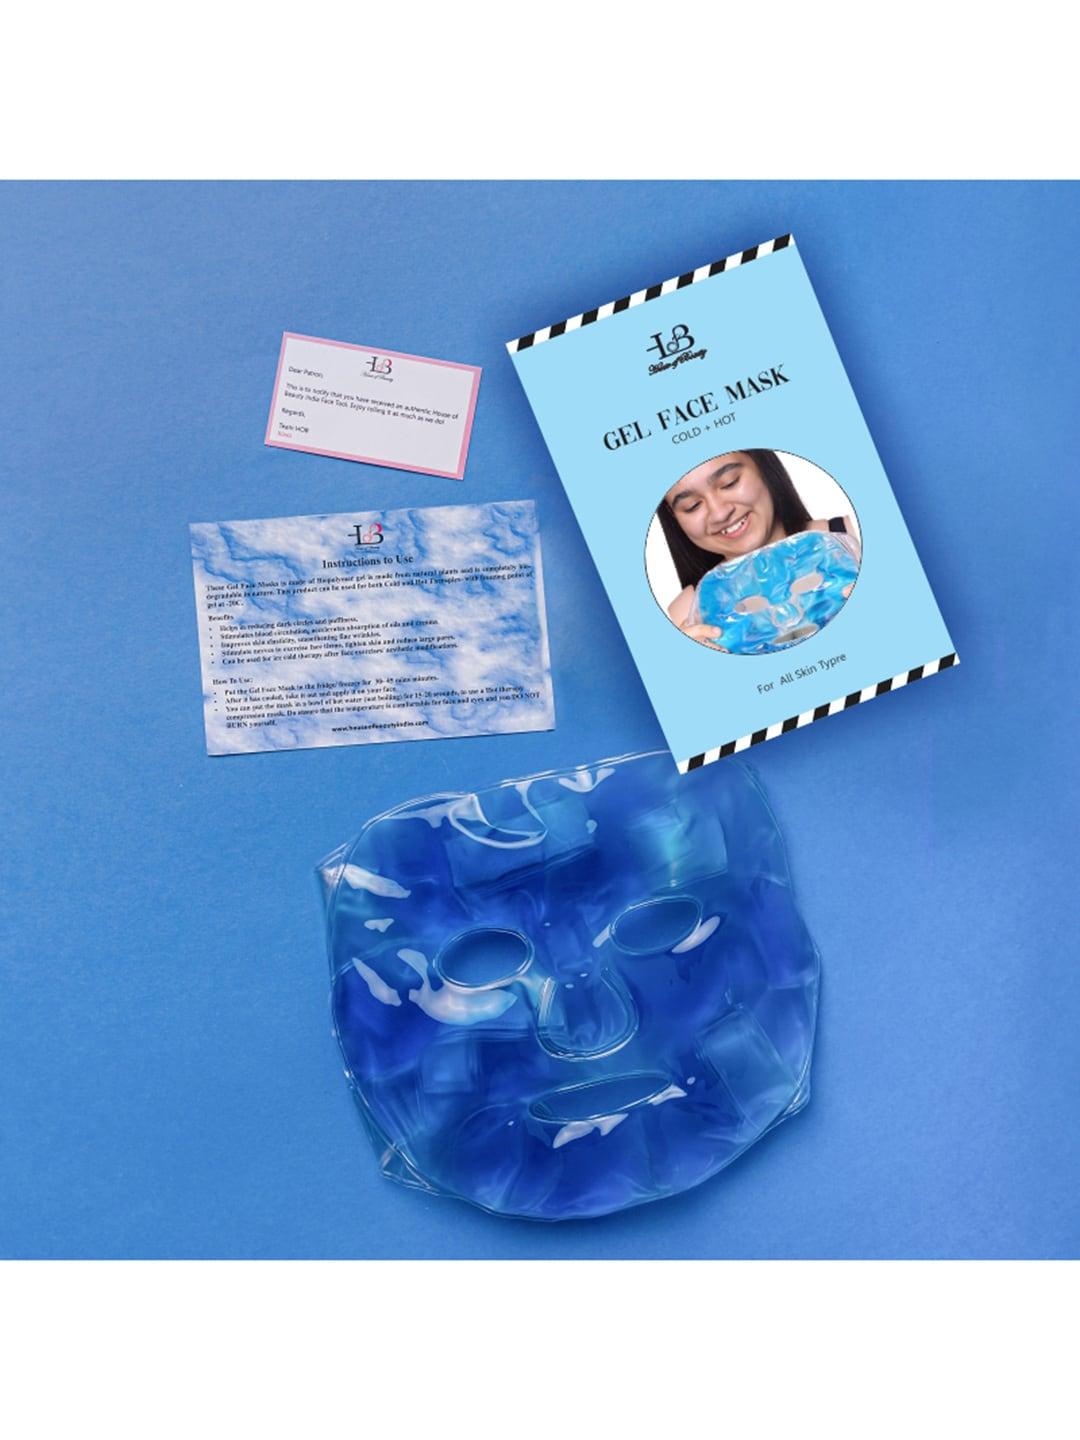 House of Beauty Gel Face Mask